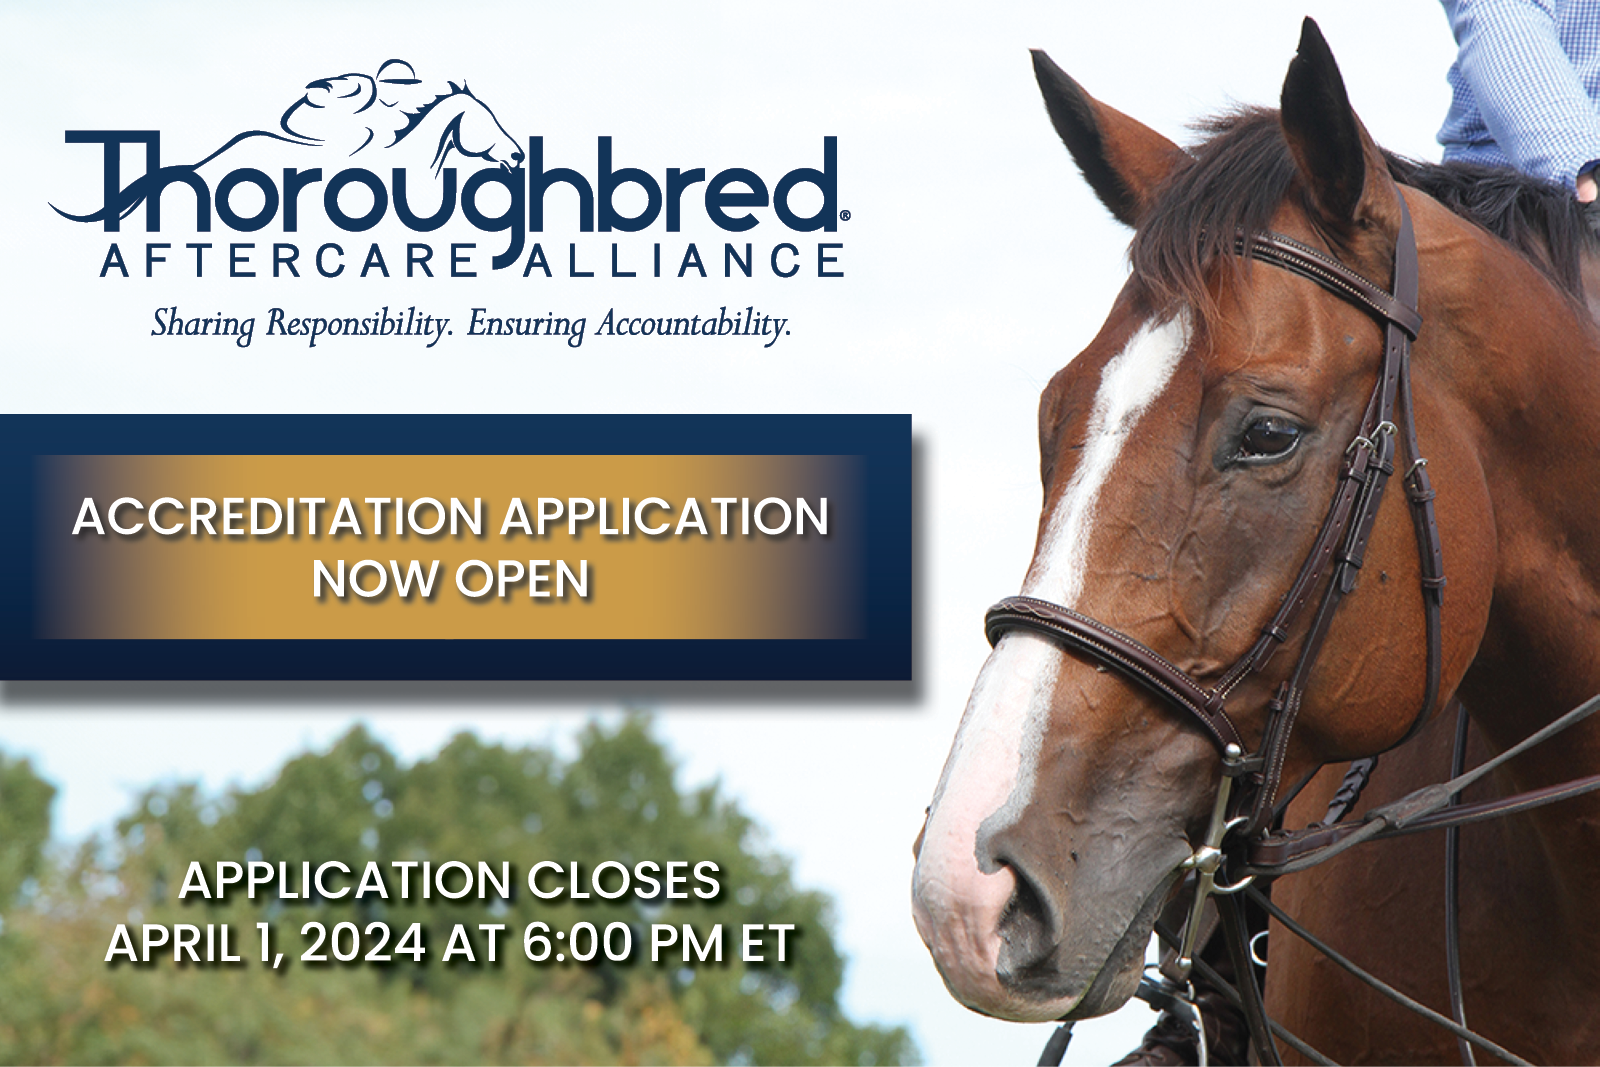 Thoroughbred Aftercare Alliance Announced Accreditation Applications Now Open for 2024